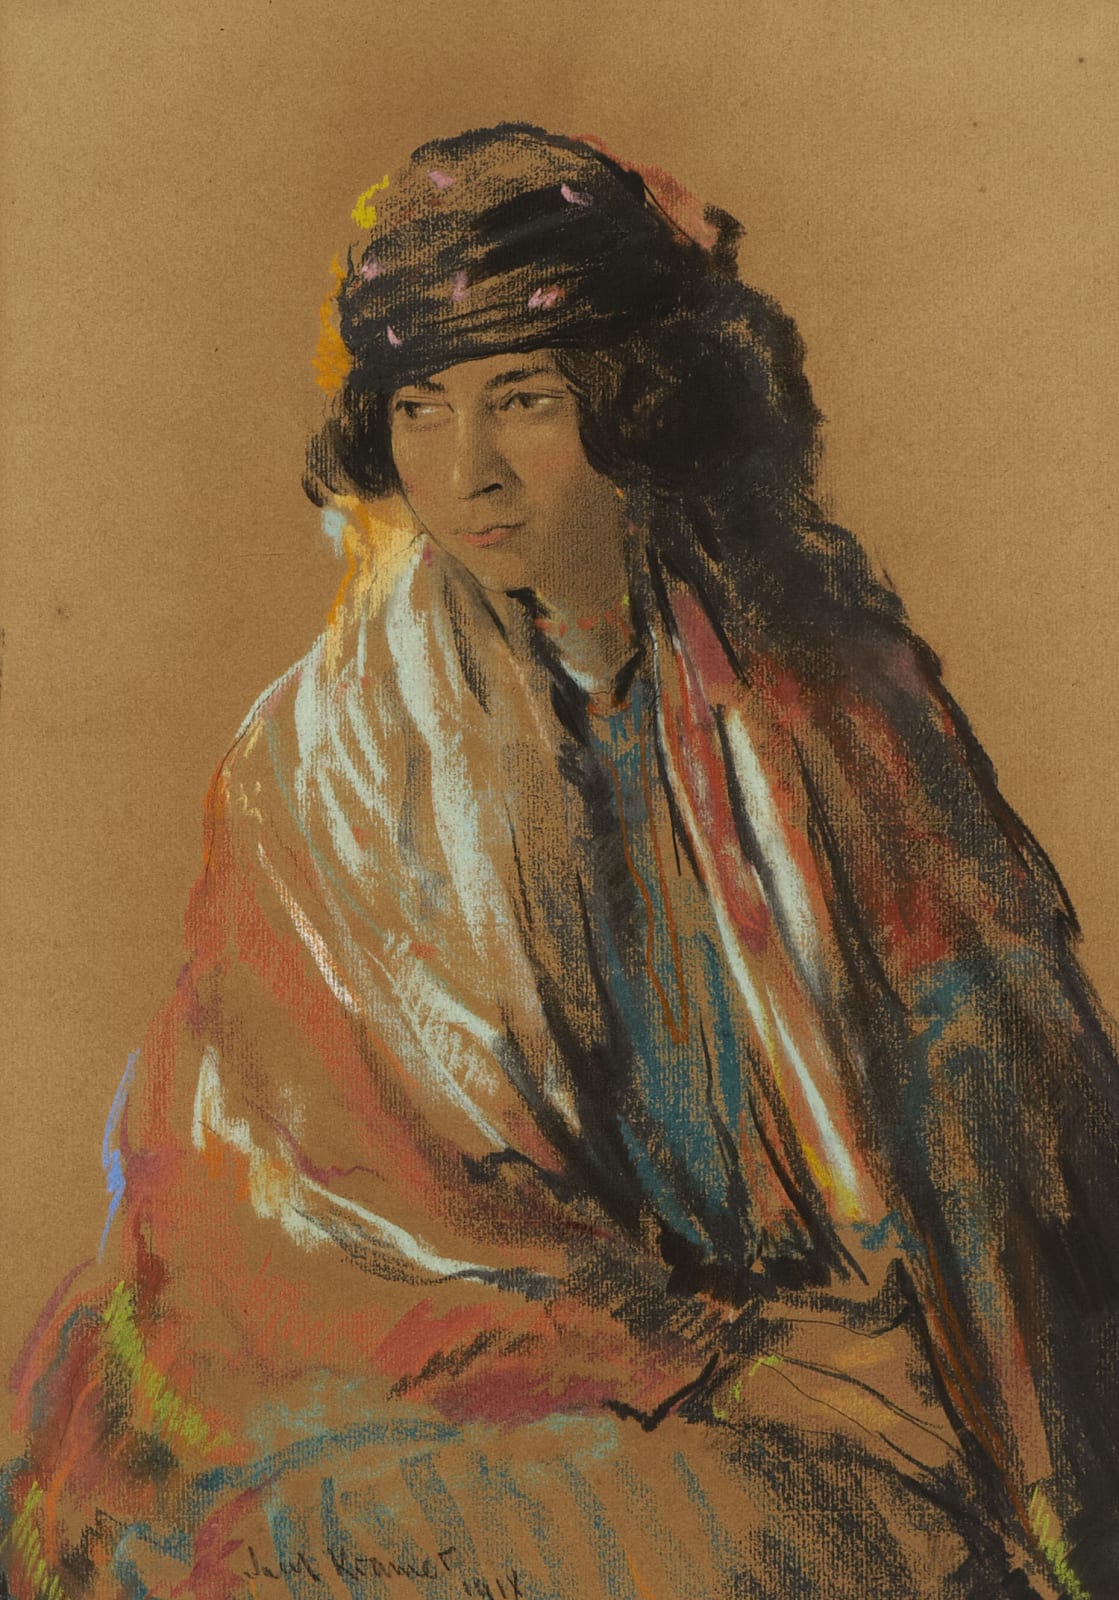 Jacob Kramer (1892-1962) Portrait of a Gypsy c.1917 Pastel and chalk on paper 44 x 31 cm Ben Uri Collection © The William Roberts Society, London